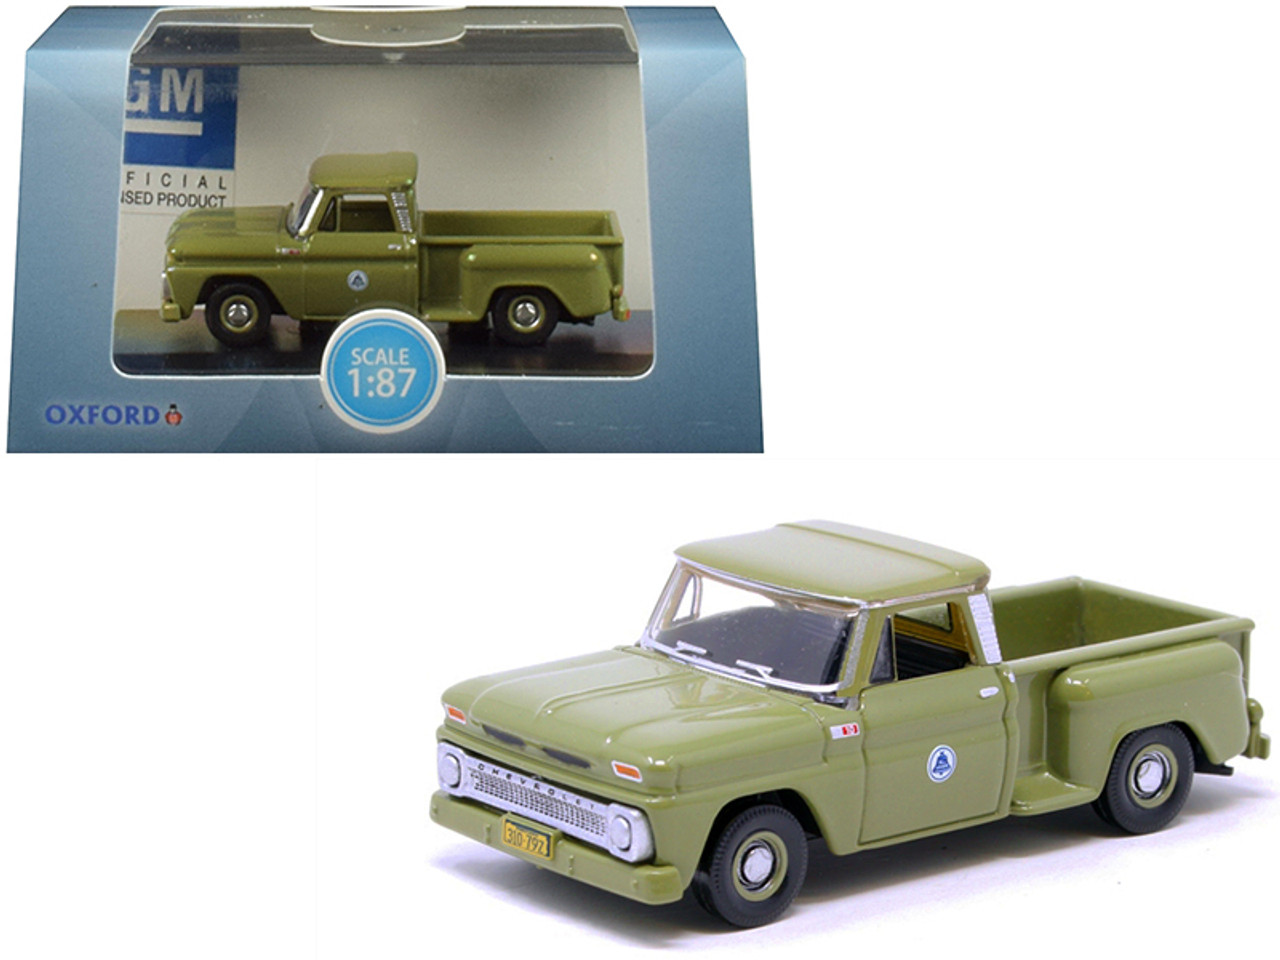 1965 Chevrolet C10 Stepside "Bell System" Pickup Truck Green 1/87 (HO) Scale Diecast Model Car by Oxford Diecast